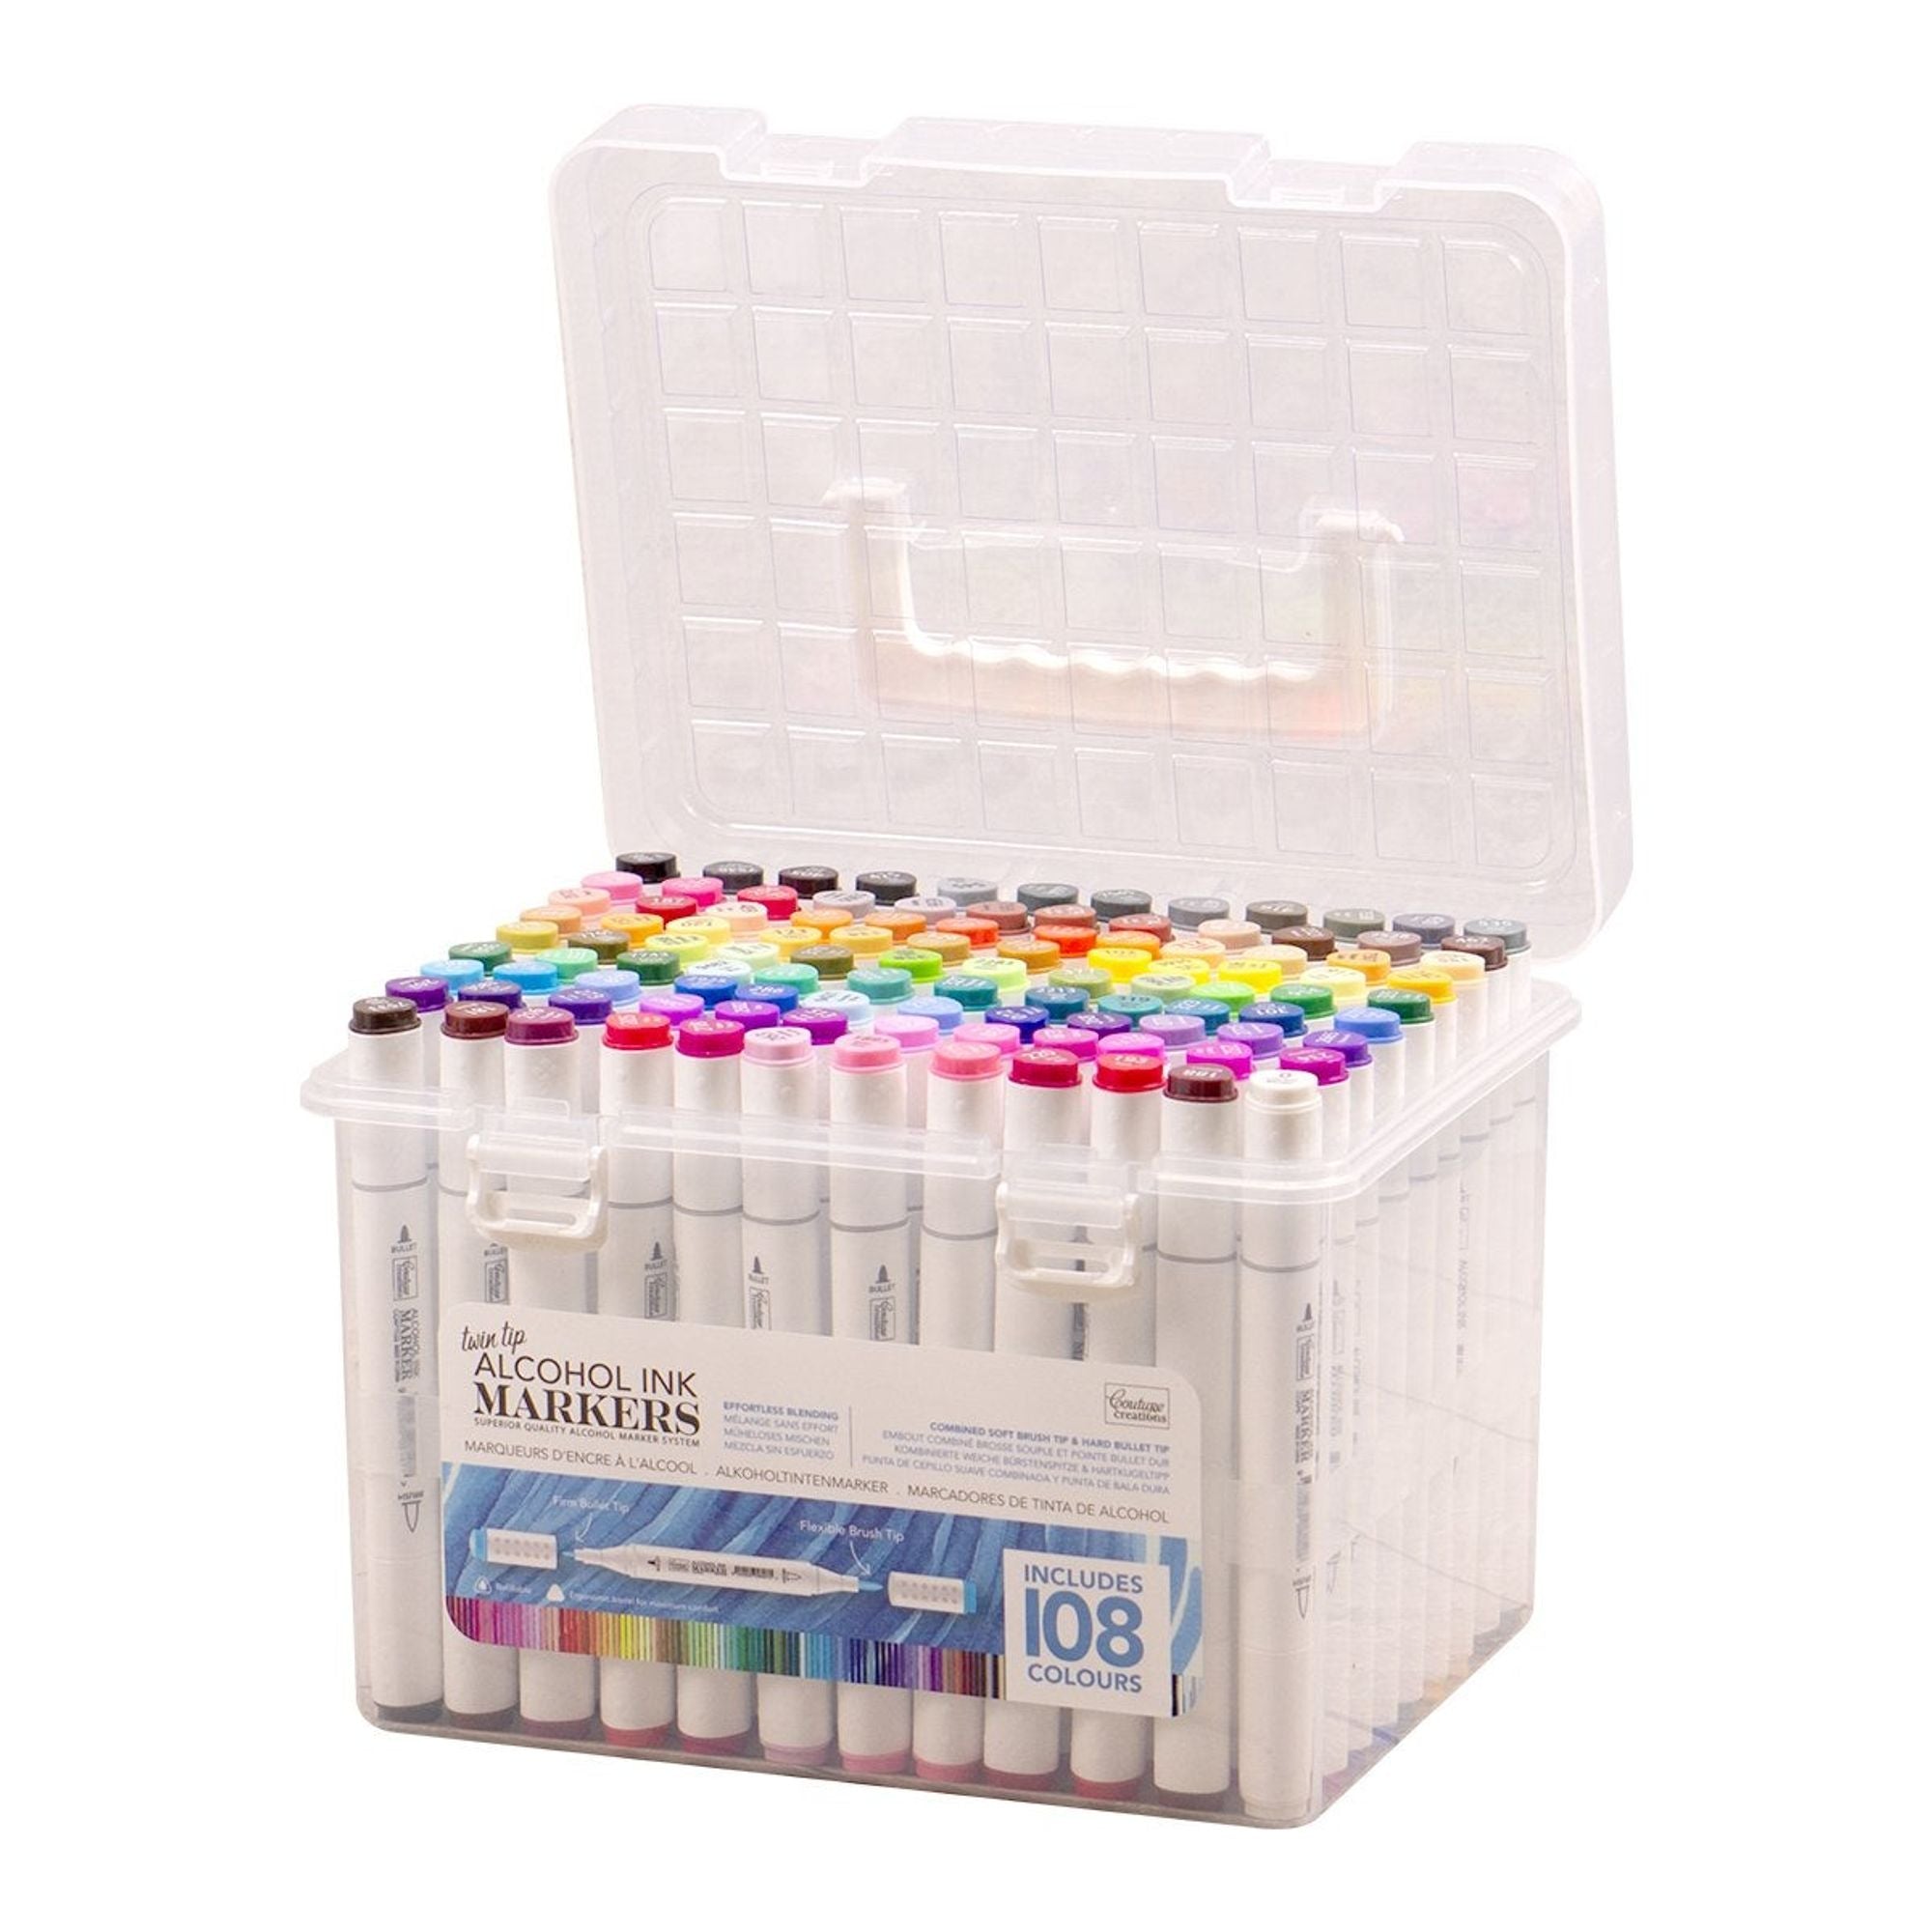 9-pk. Double Ended Stamp Markers Set